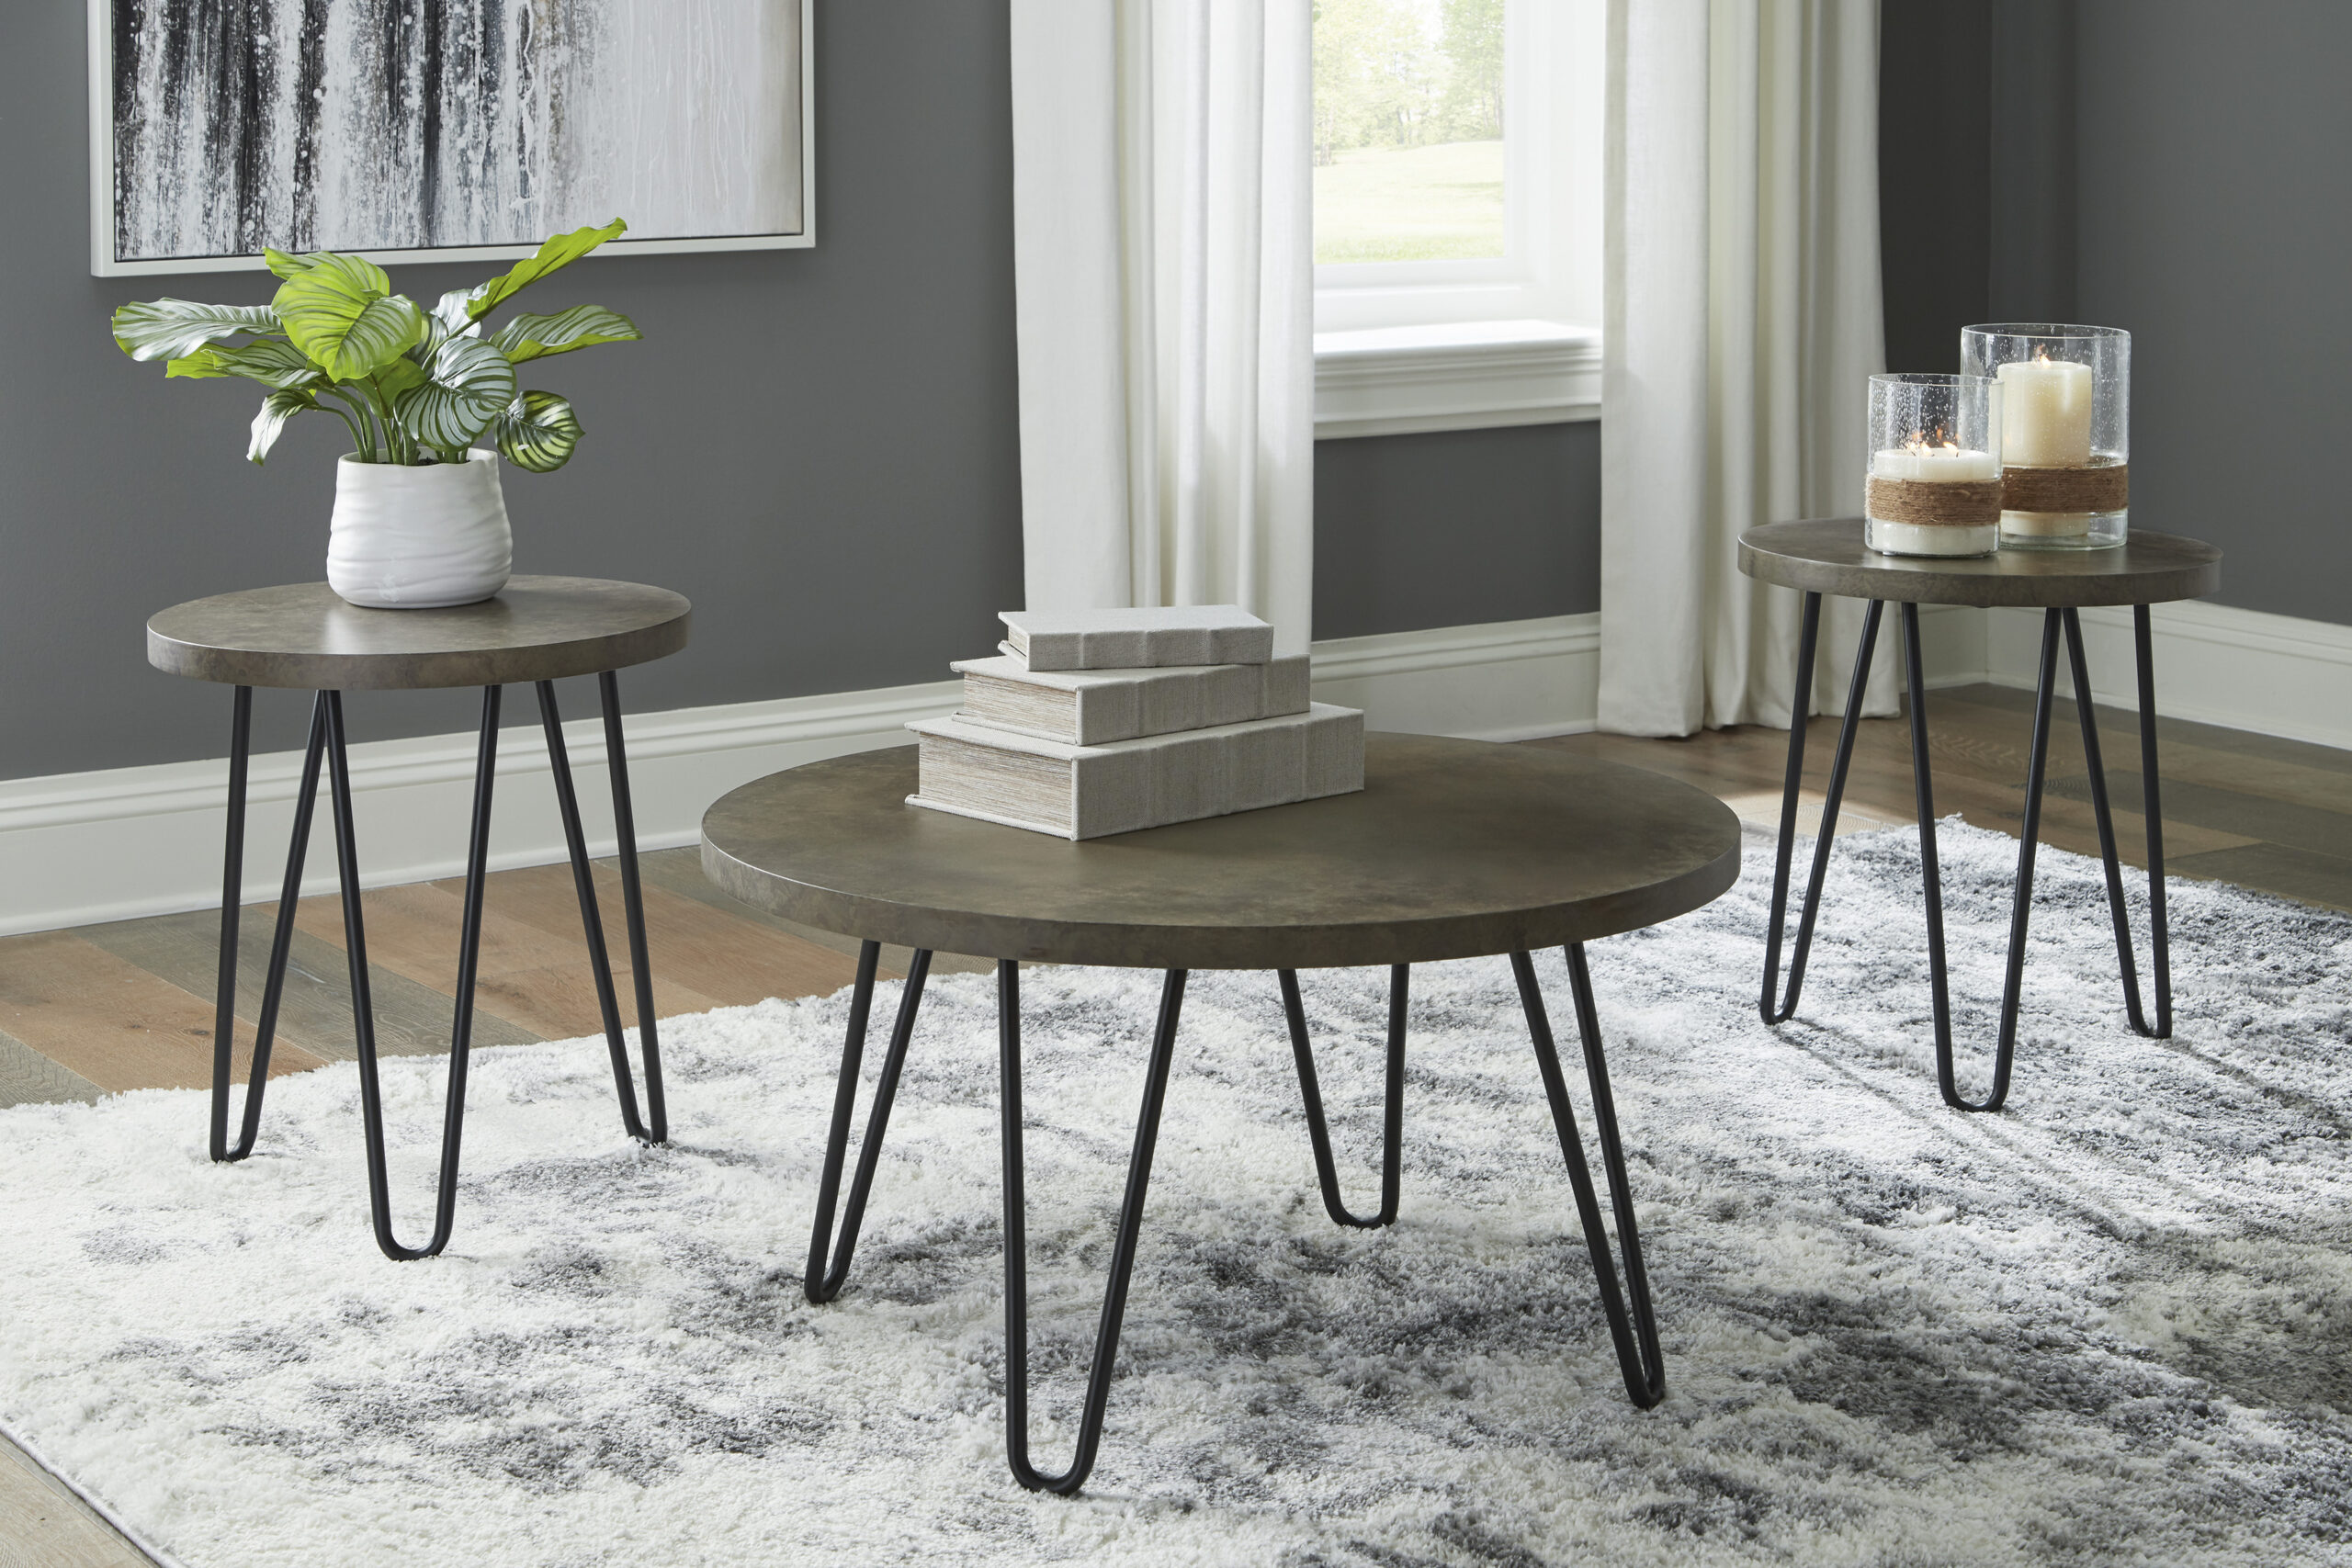 T144-13 Hadasky Cocktail Table & 2 End Tables